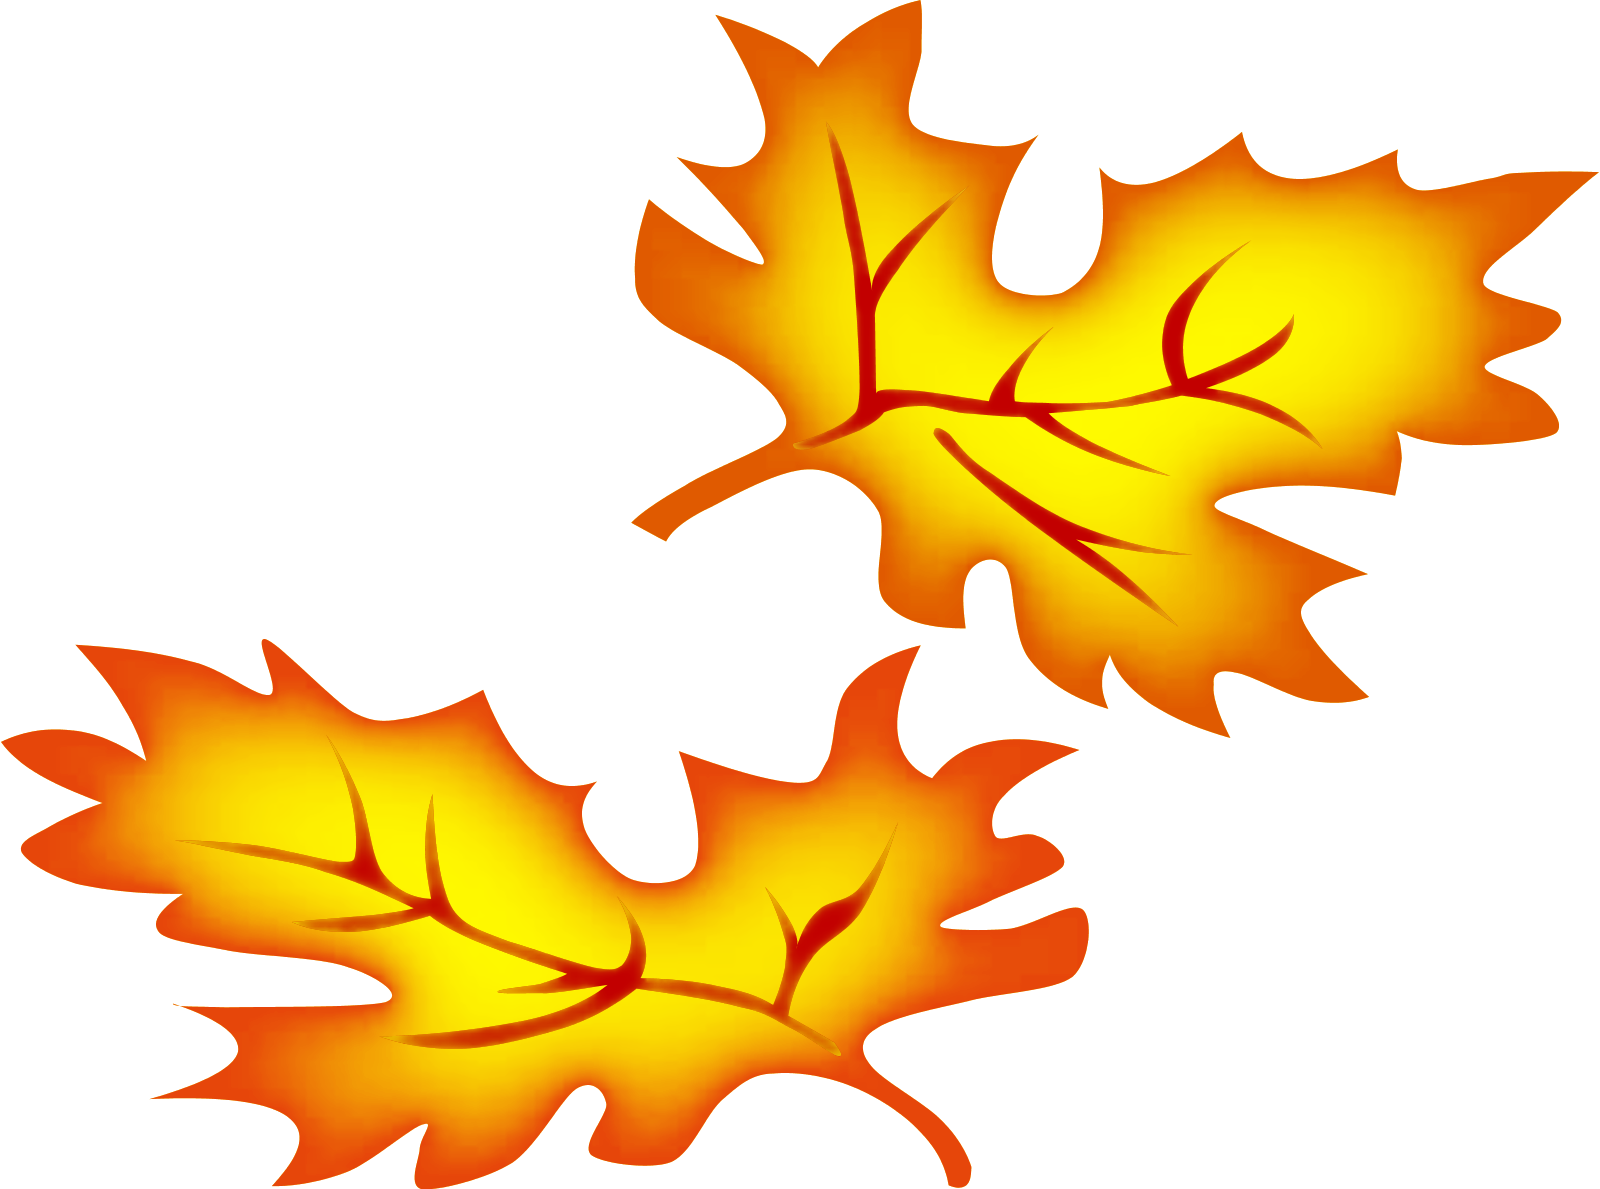 Fall leaves border clipart free images 3